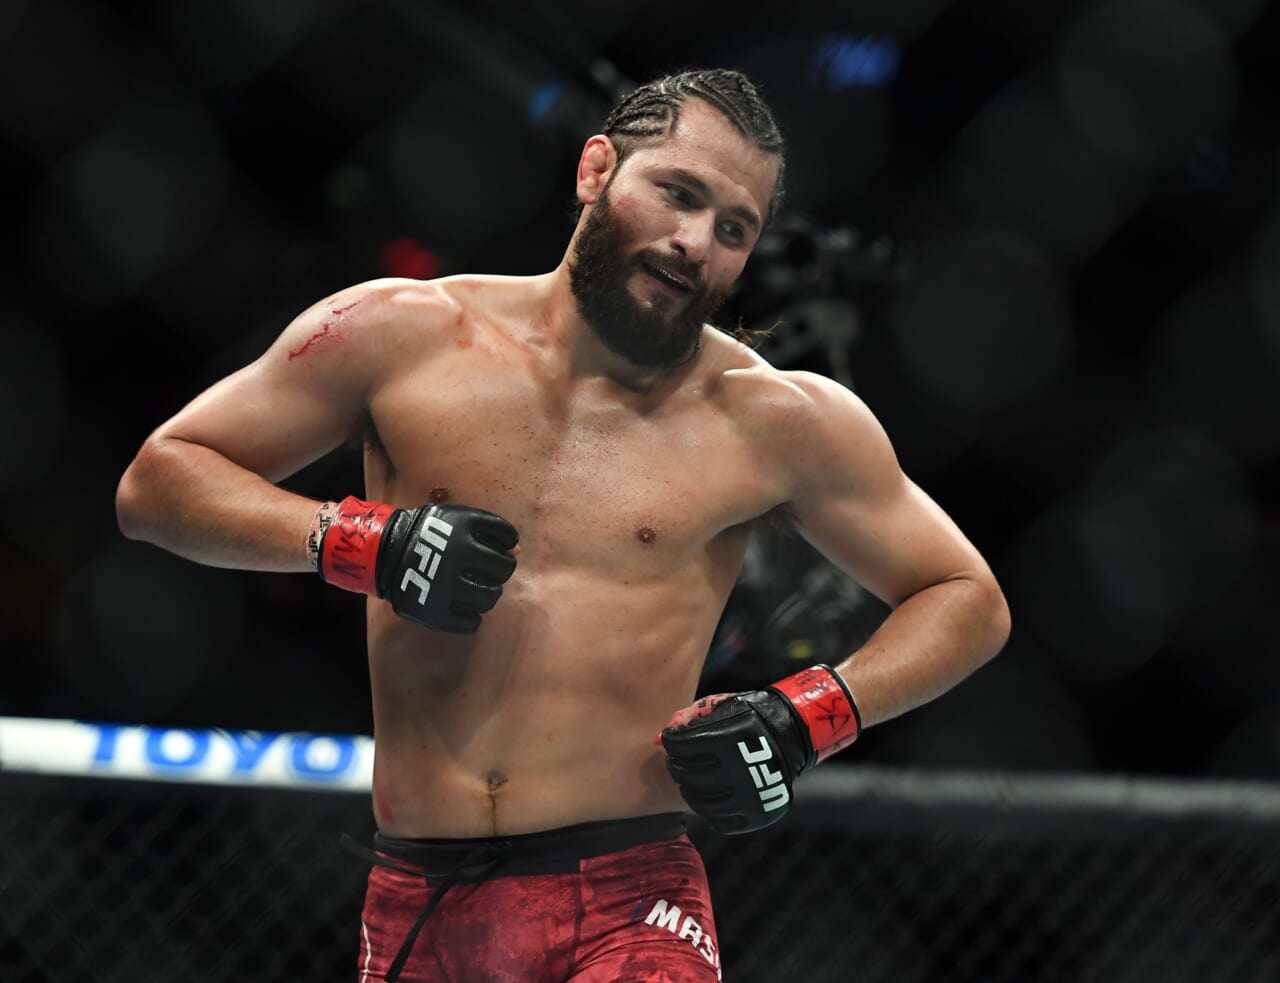 UFC: Could Masvidal and Diaz be the next coaches on The Ultimate Fighter?